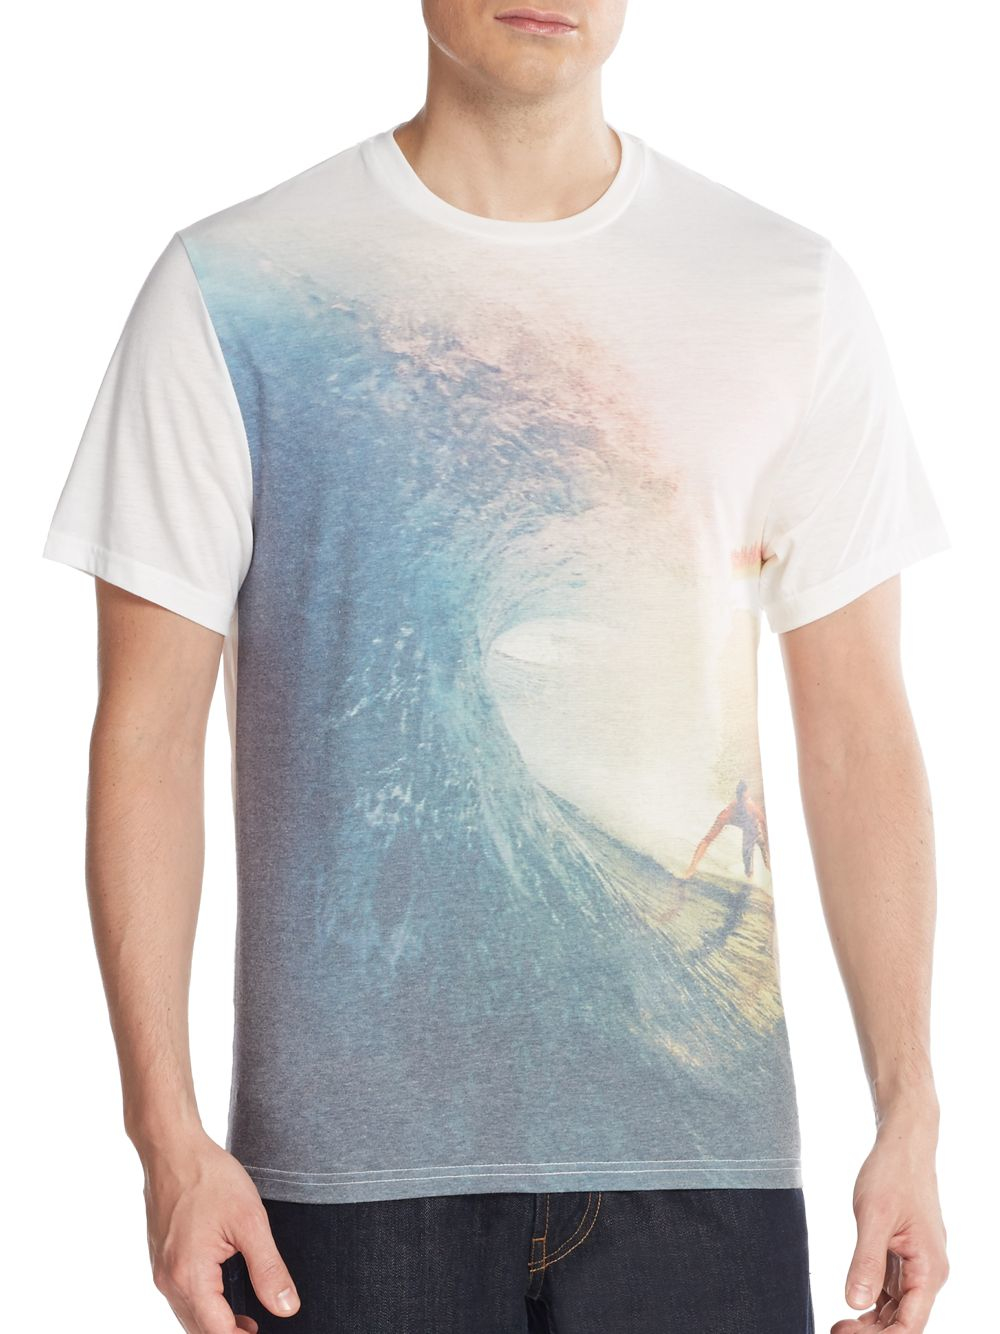 Threads For Thought Cotton Wave Graphic Tee in White for Men - Lyst